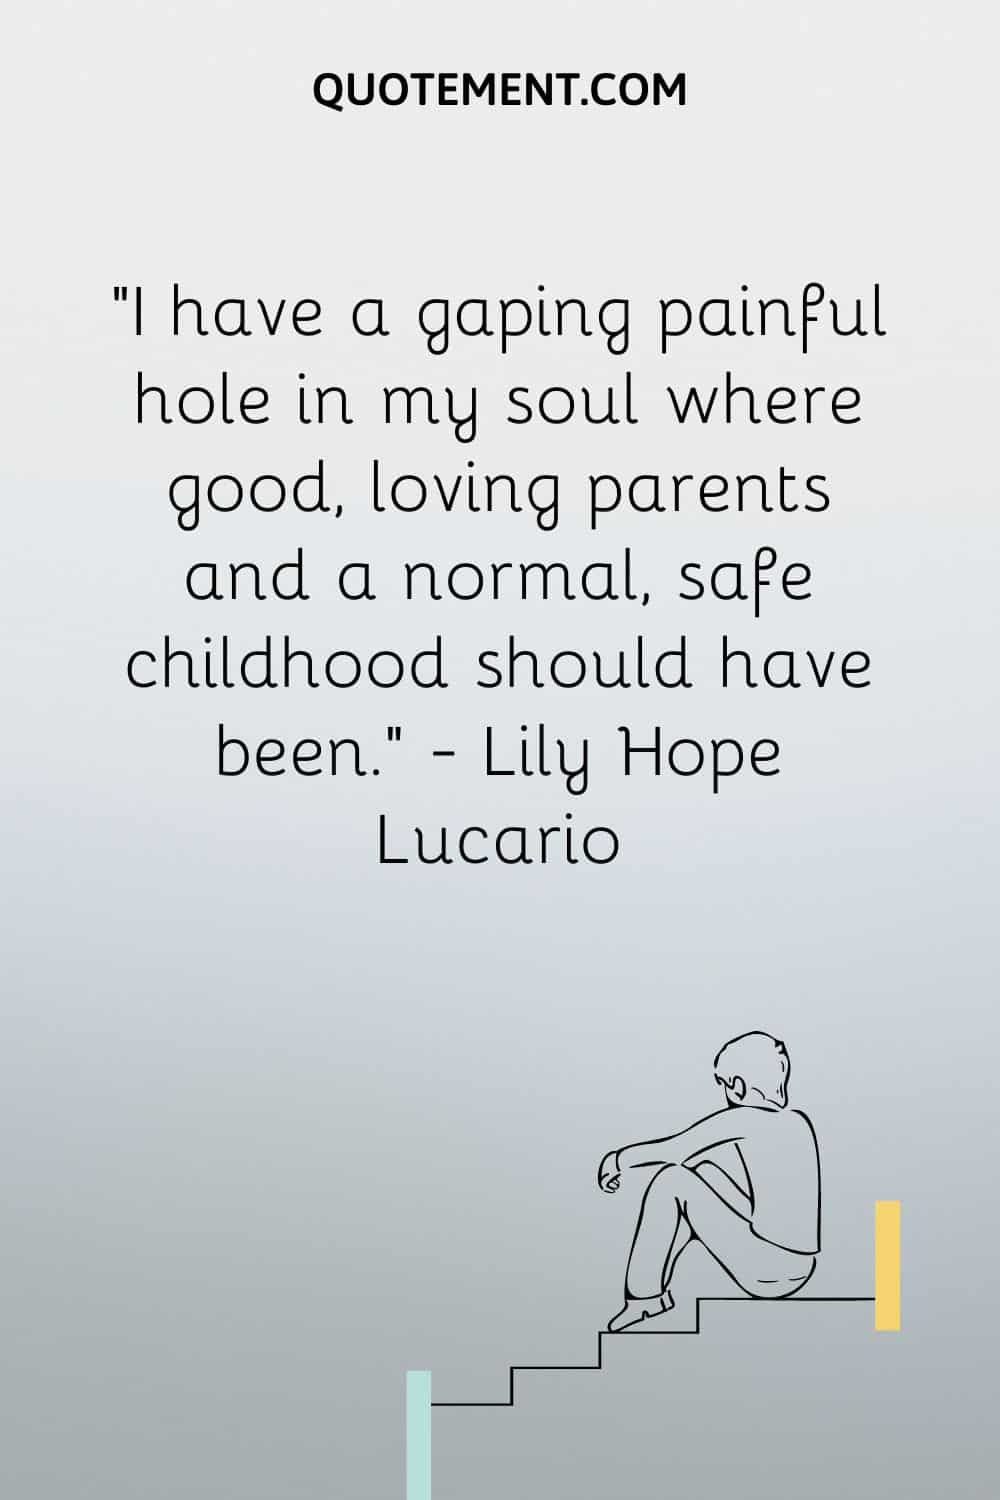 I have a gaping painful hole in my soul where good, loving parents and a normal, safe childhood should have been.